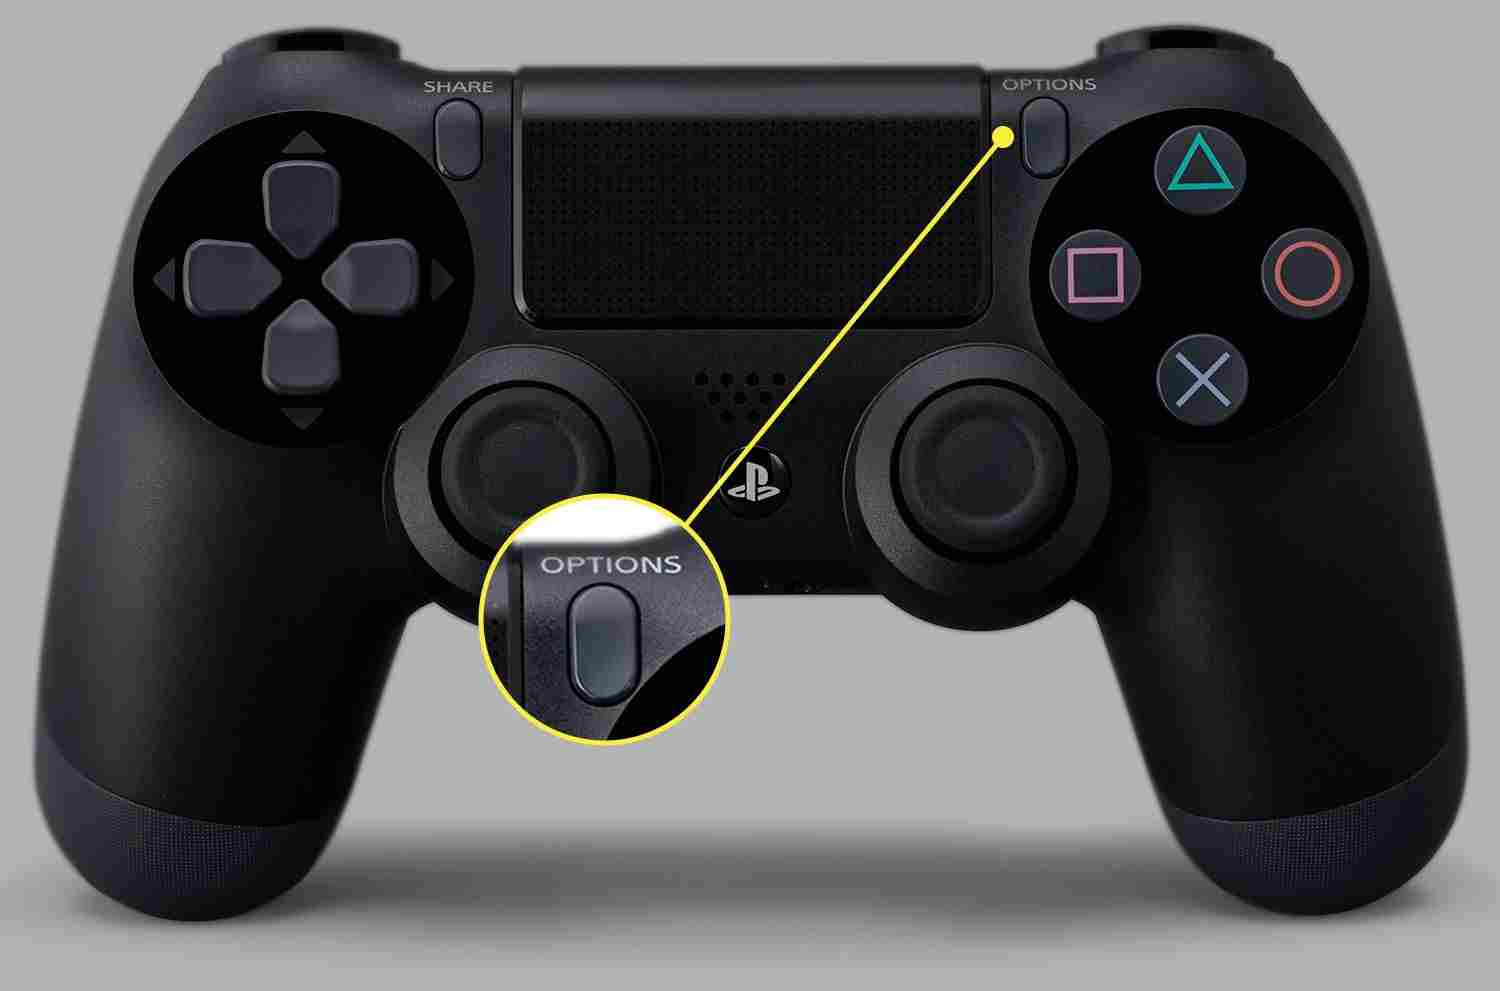 Press the options button on controller